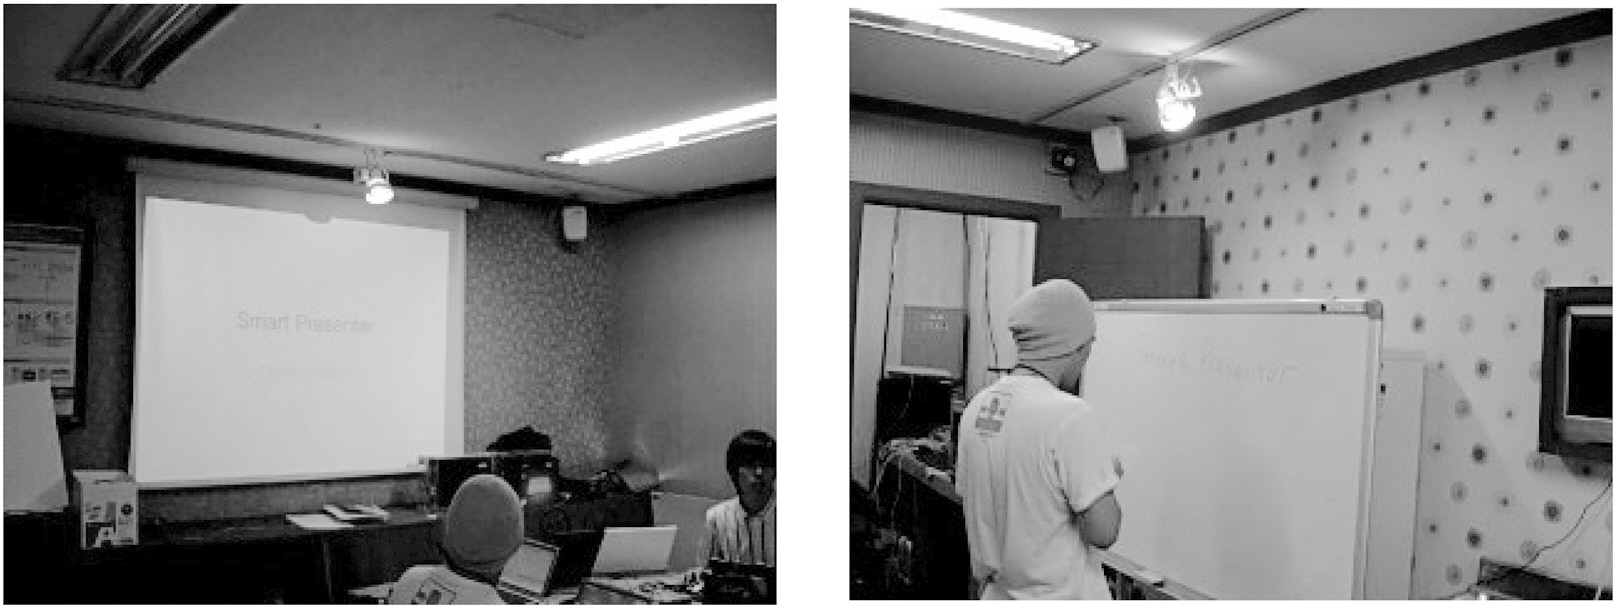 Snapshots of Smart Presenter implemented on a smart room. The left picture shows a presentation situation and the right picture shows a situationthat a presenter approximate the whiteboard.